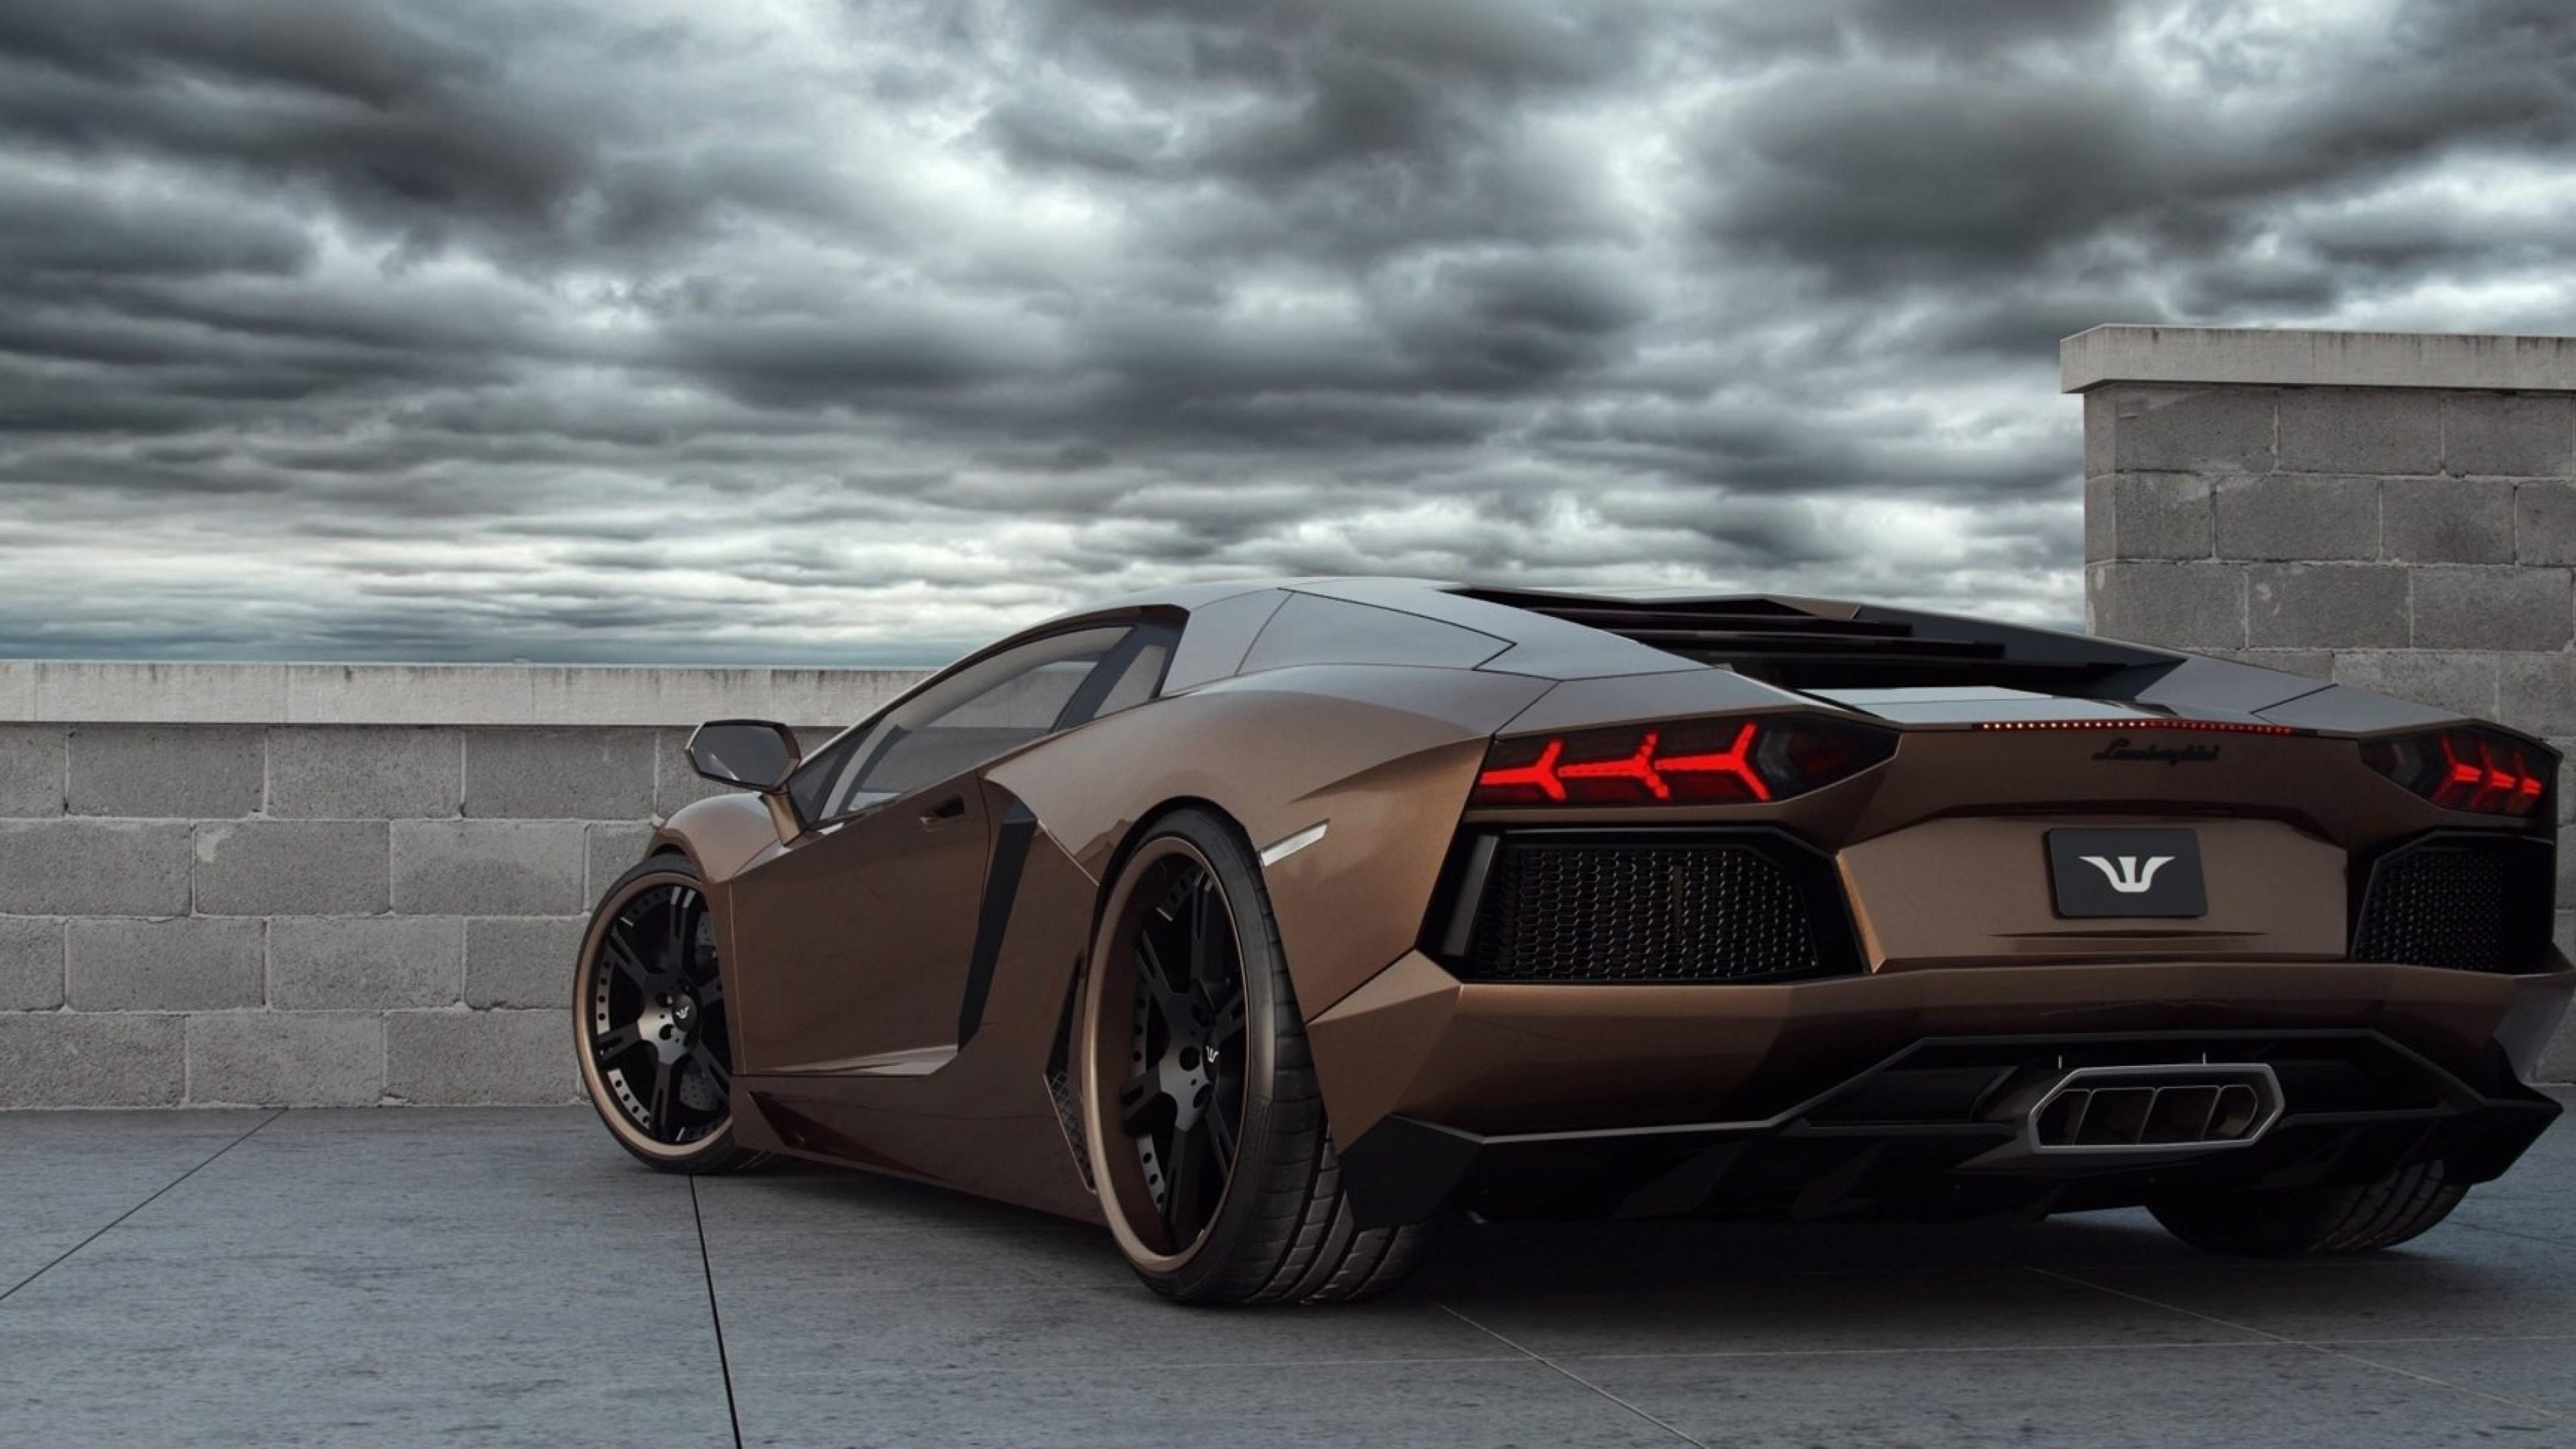 Luxury Cars Hd Wallpapers Top Hd Wallpapers - vrogue.co